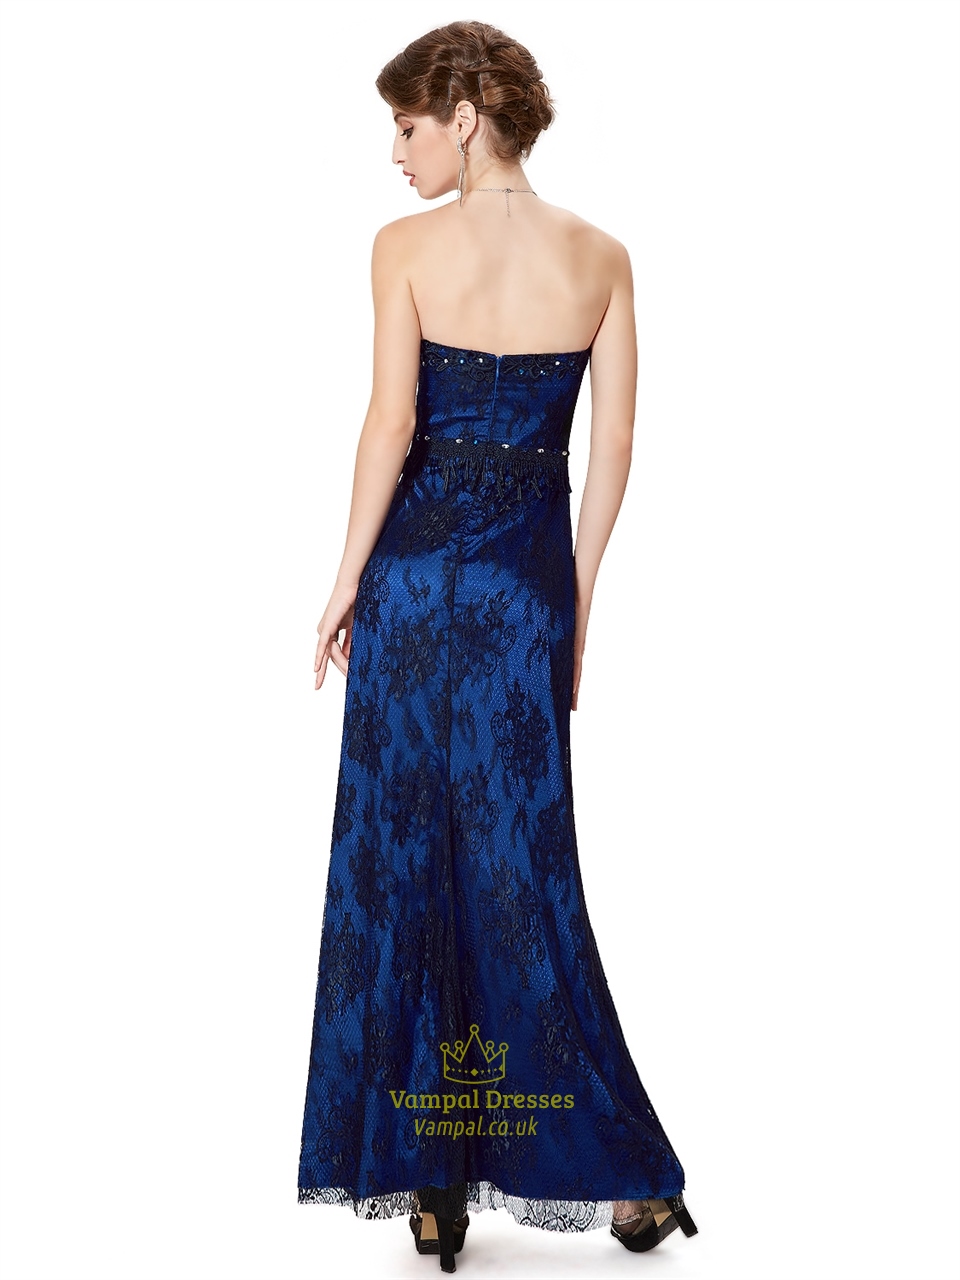 Royal Blue And Black Strapless Lace Prom Dress With Beaded Detail